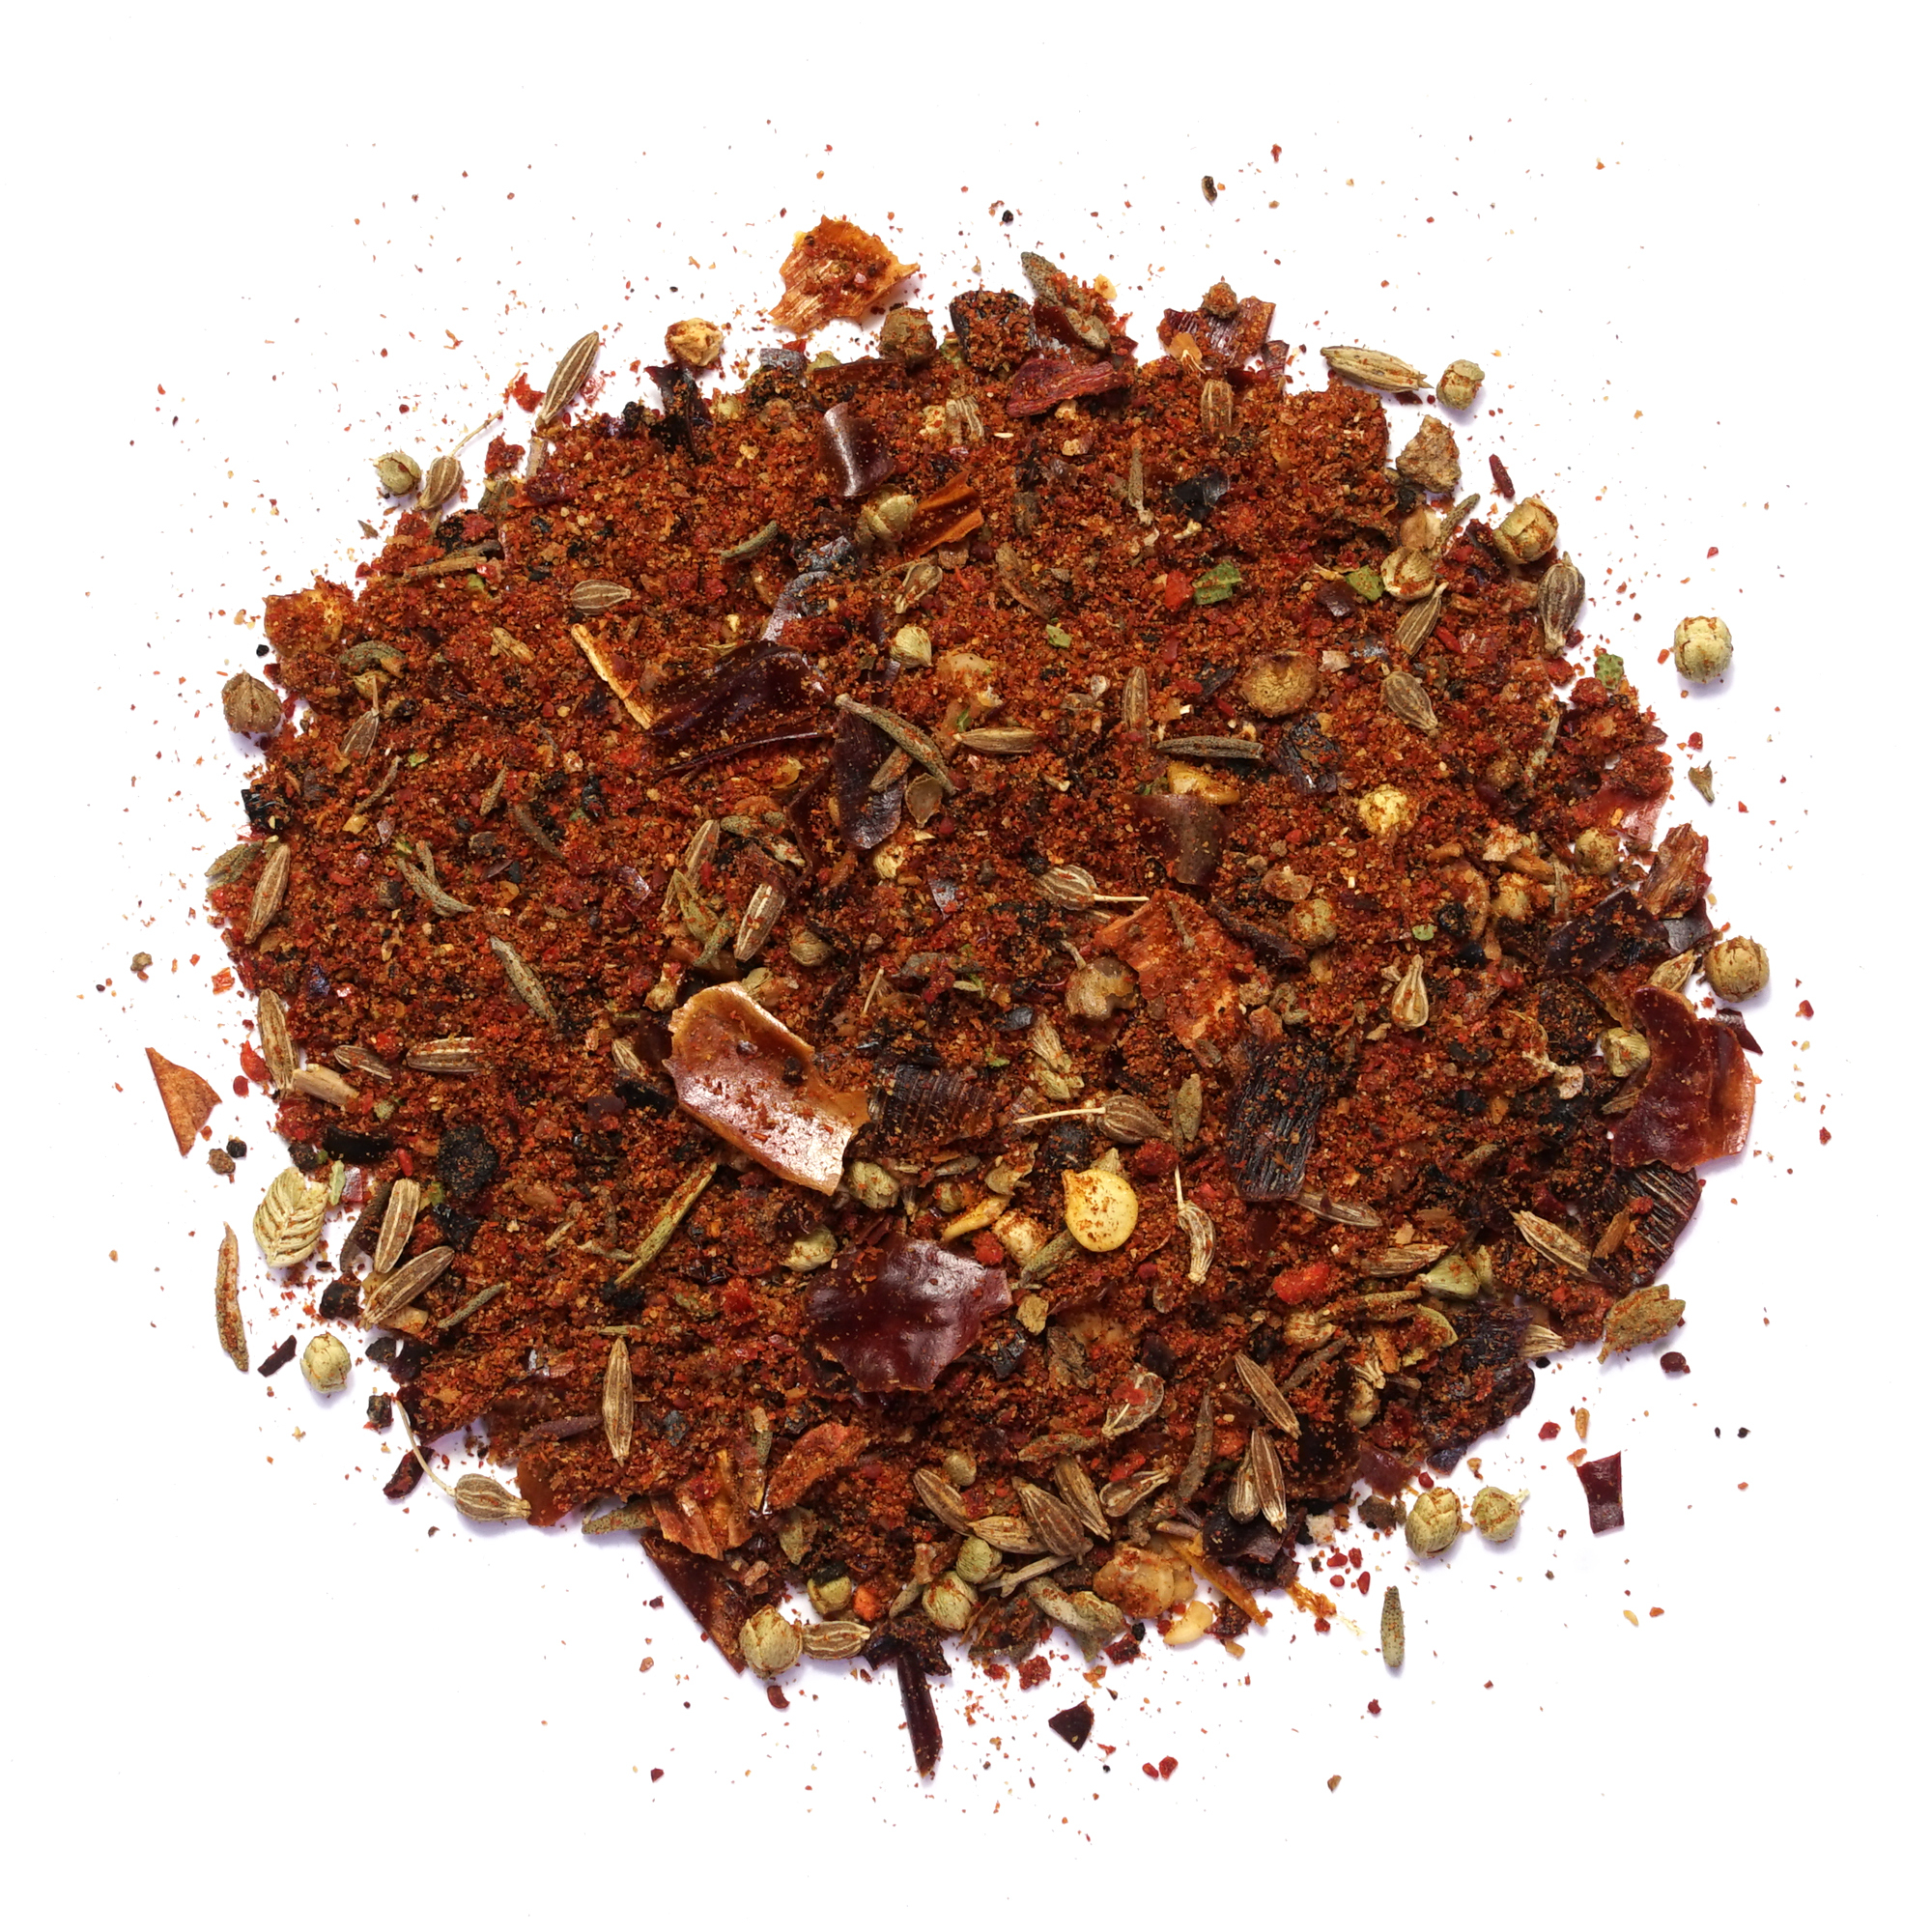 Chili spice blend - Hot and smoky